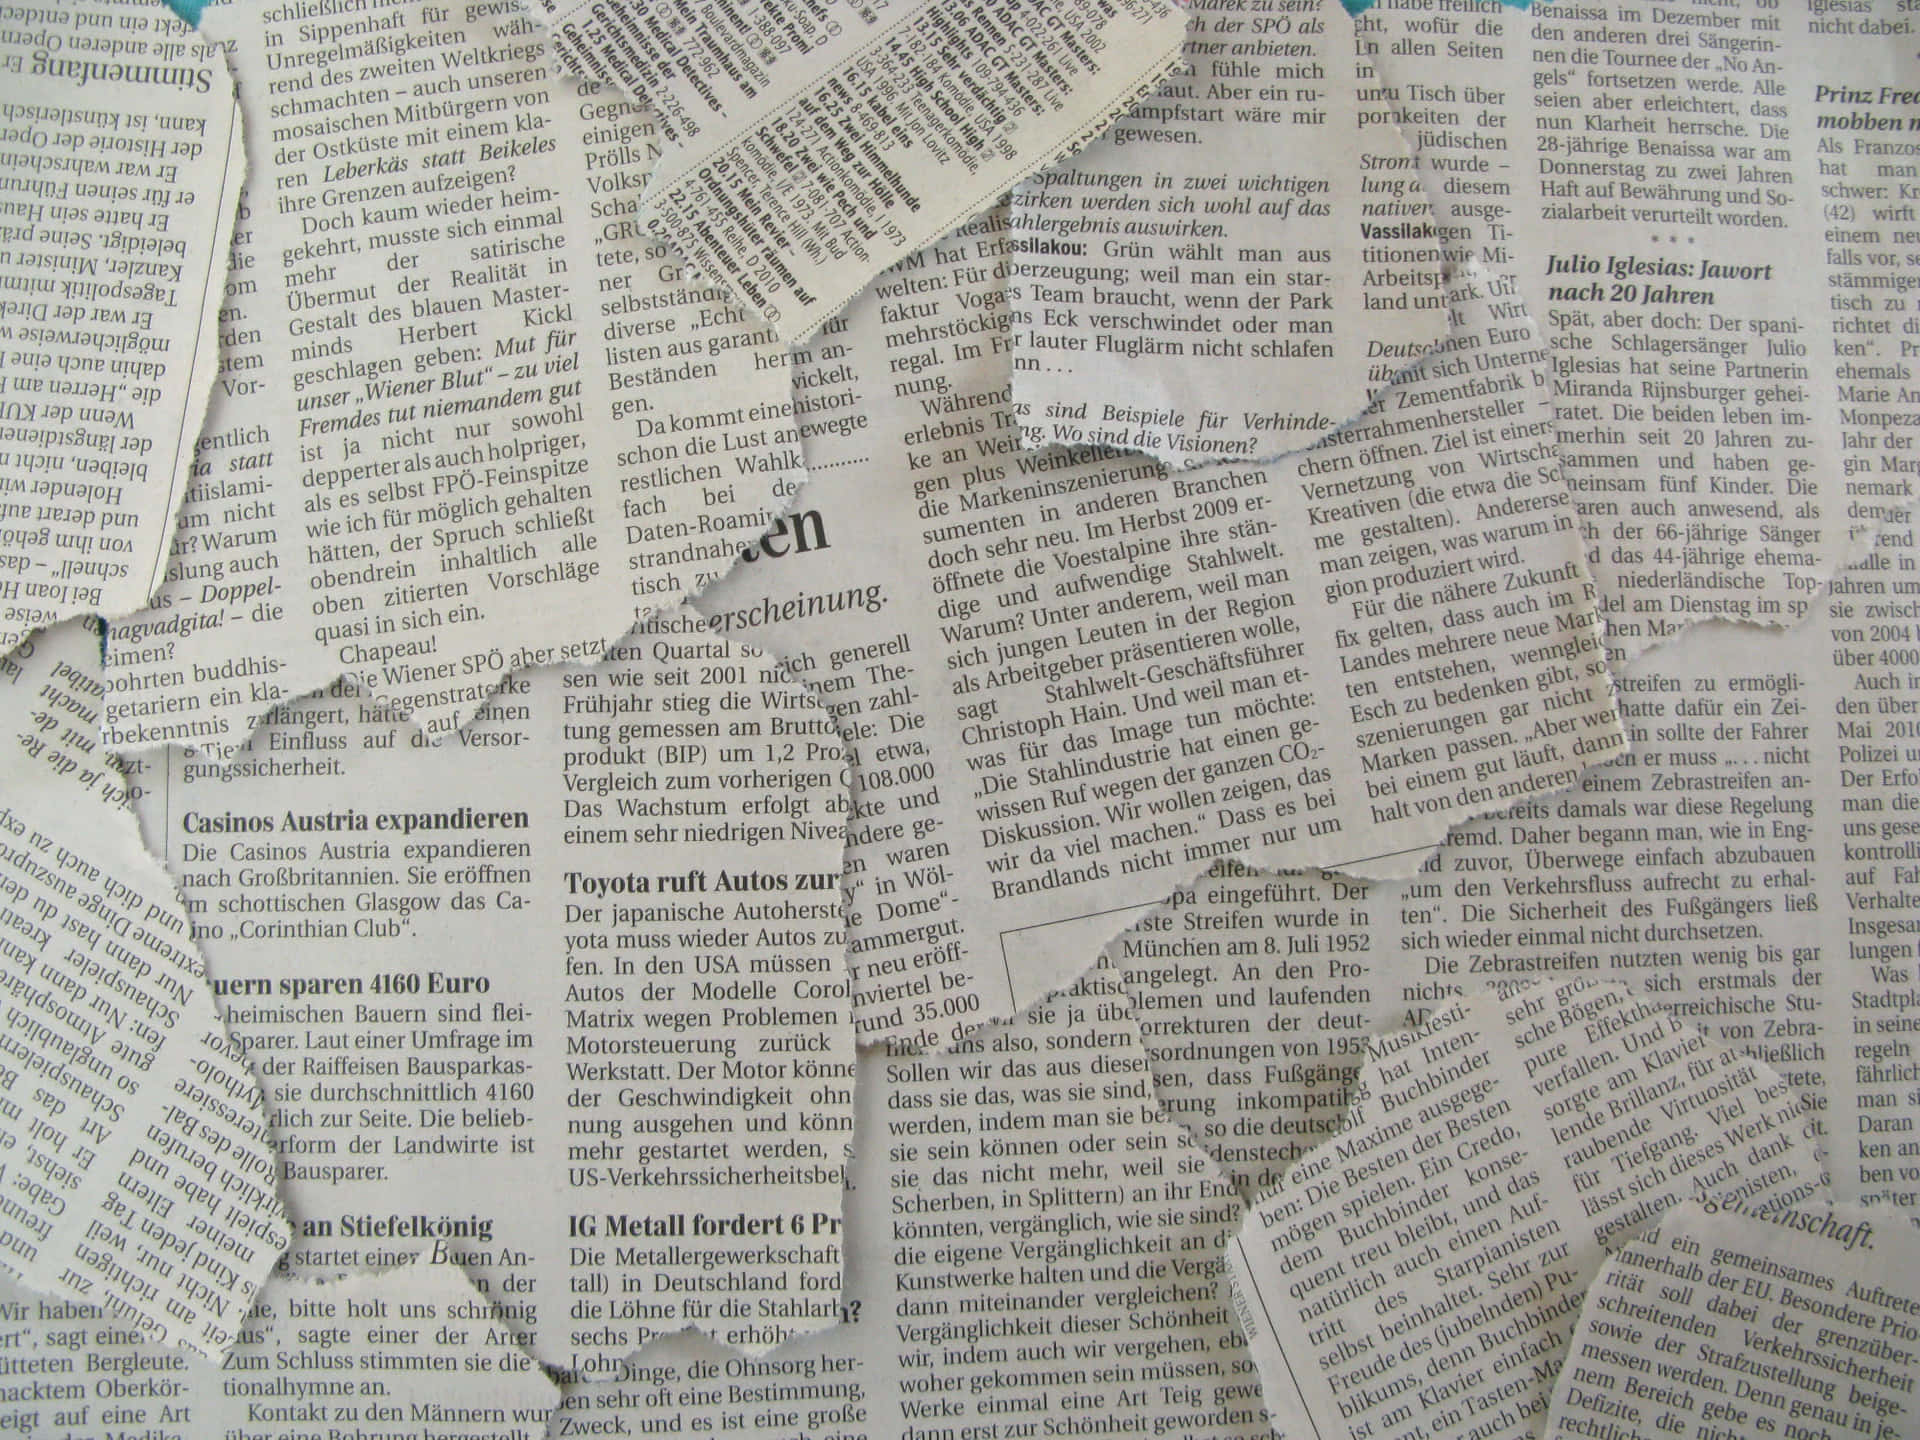 Take a look back at news from your vintage newspaper.